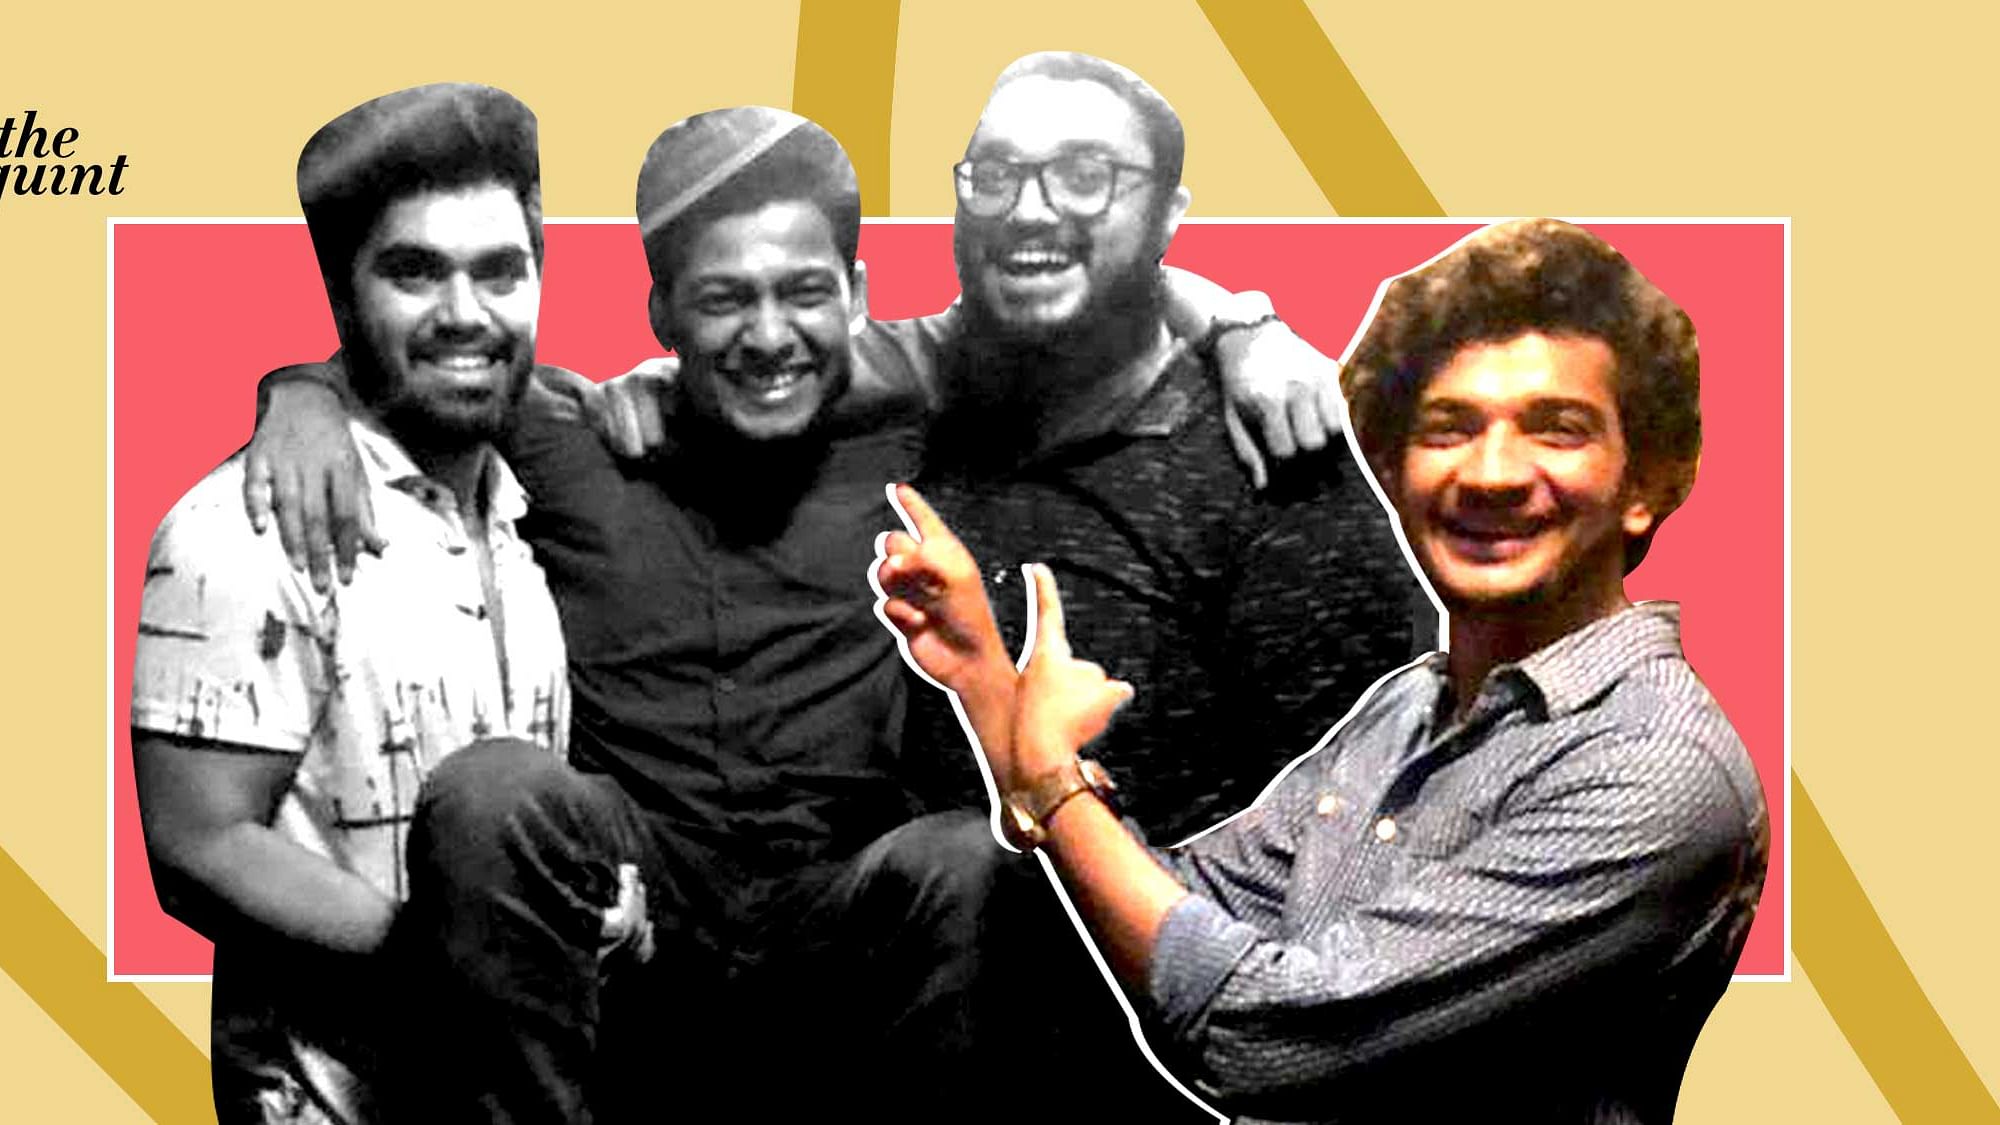 From Munawar’s losing his mother, who died by suicide, to him relentlessly chasing his dream of being a stand-up comedian despite all odds, his friends (from left) Sagar, Anish and Saad tell us who Munawar was beyond his on-stage persona.